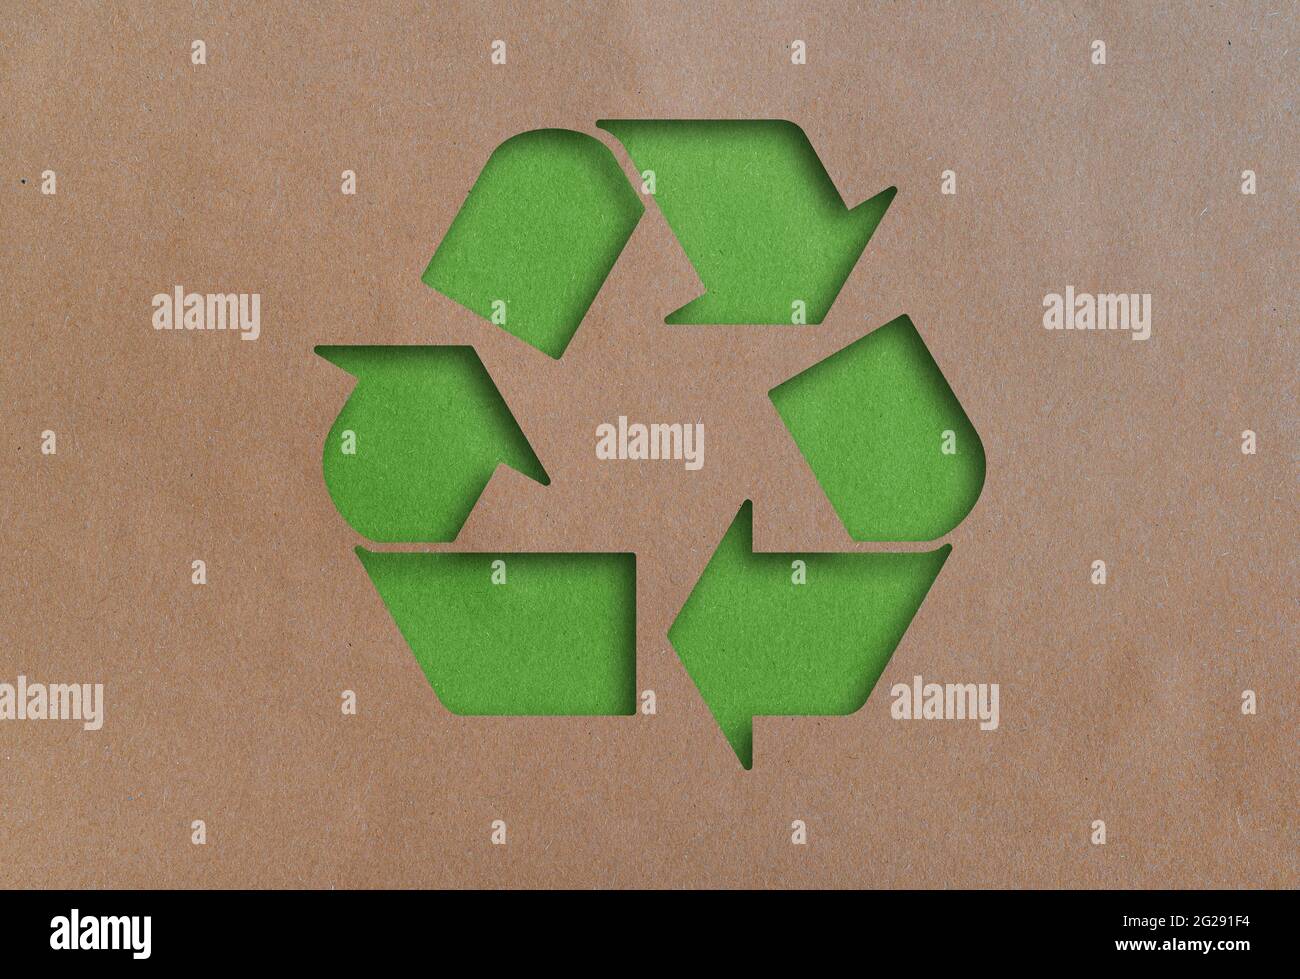 recycling symbol cut out of brown recycled paper Stock Photo